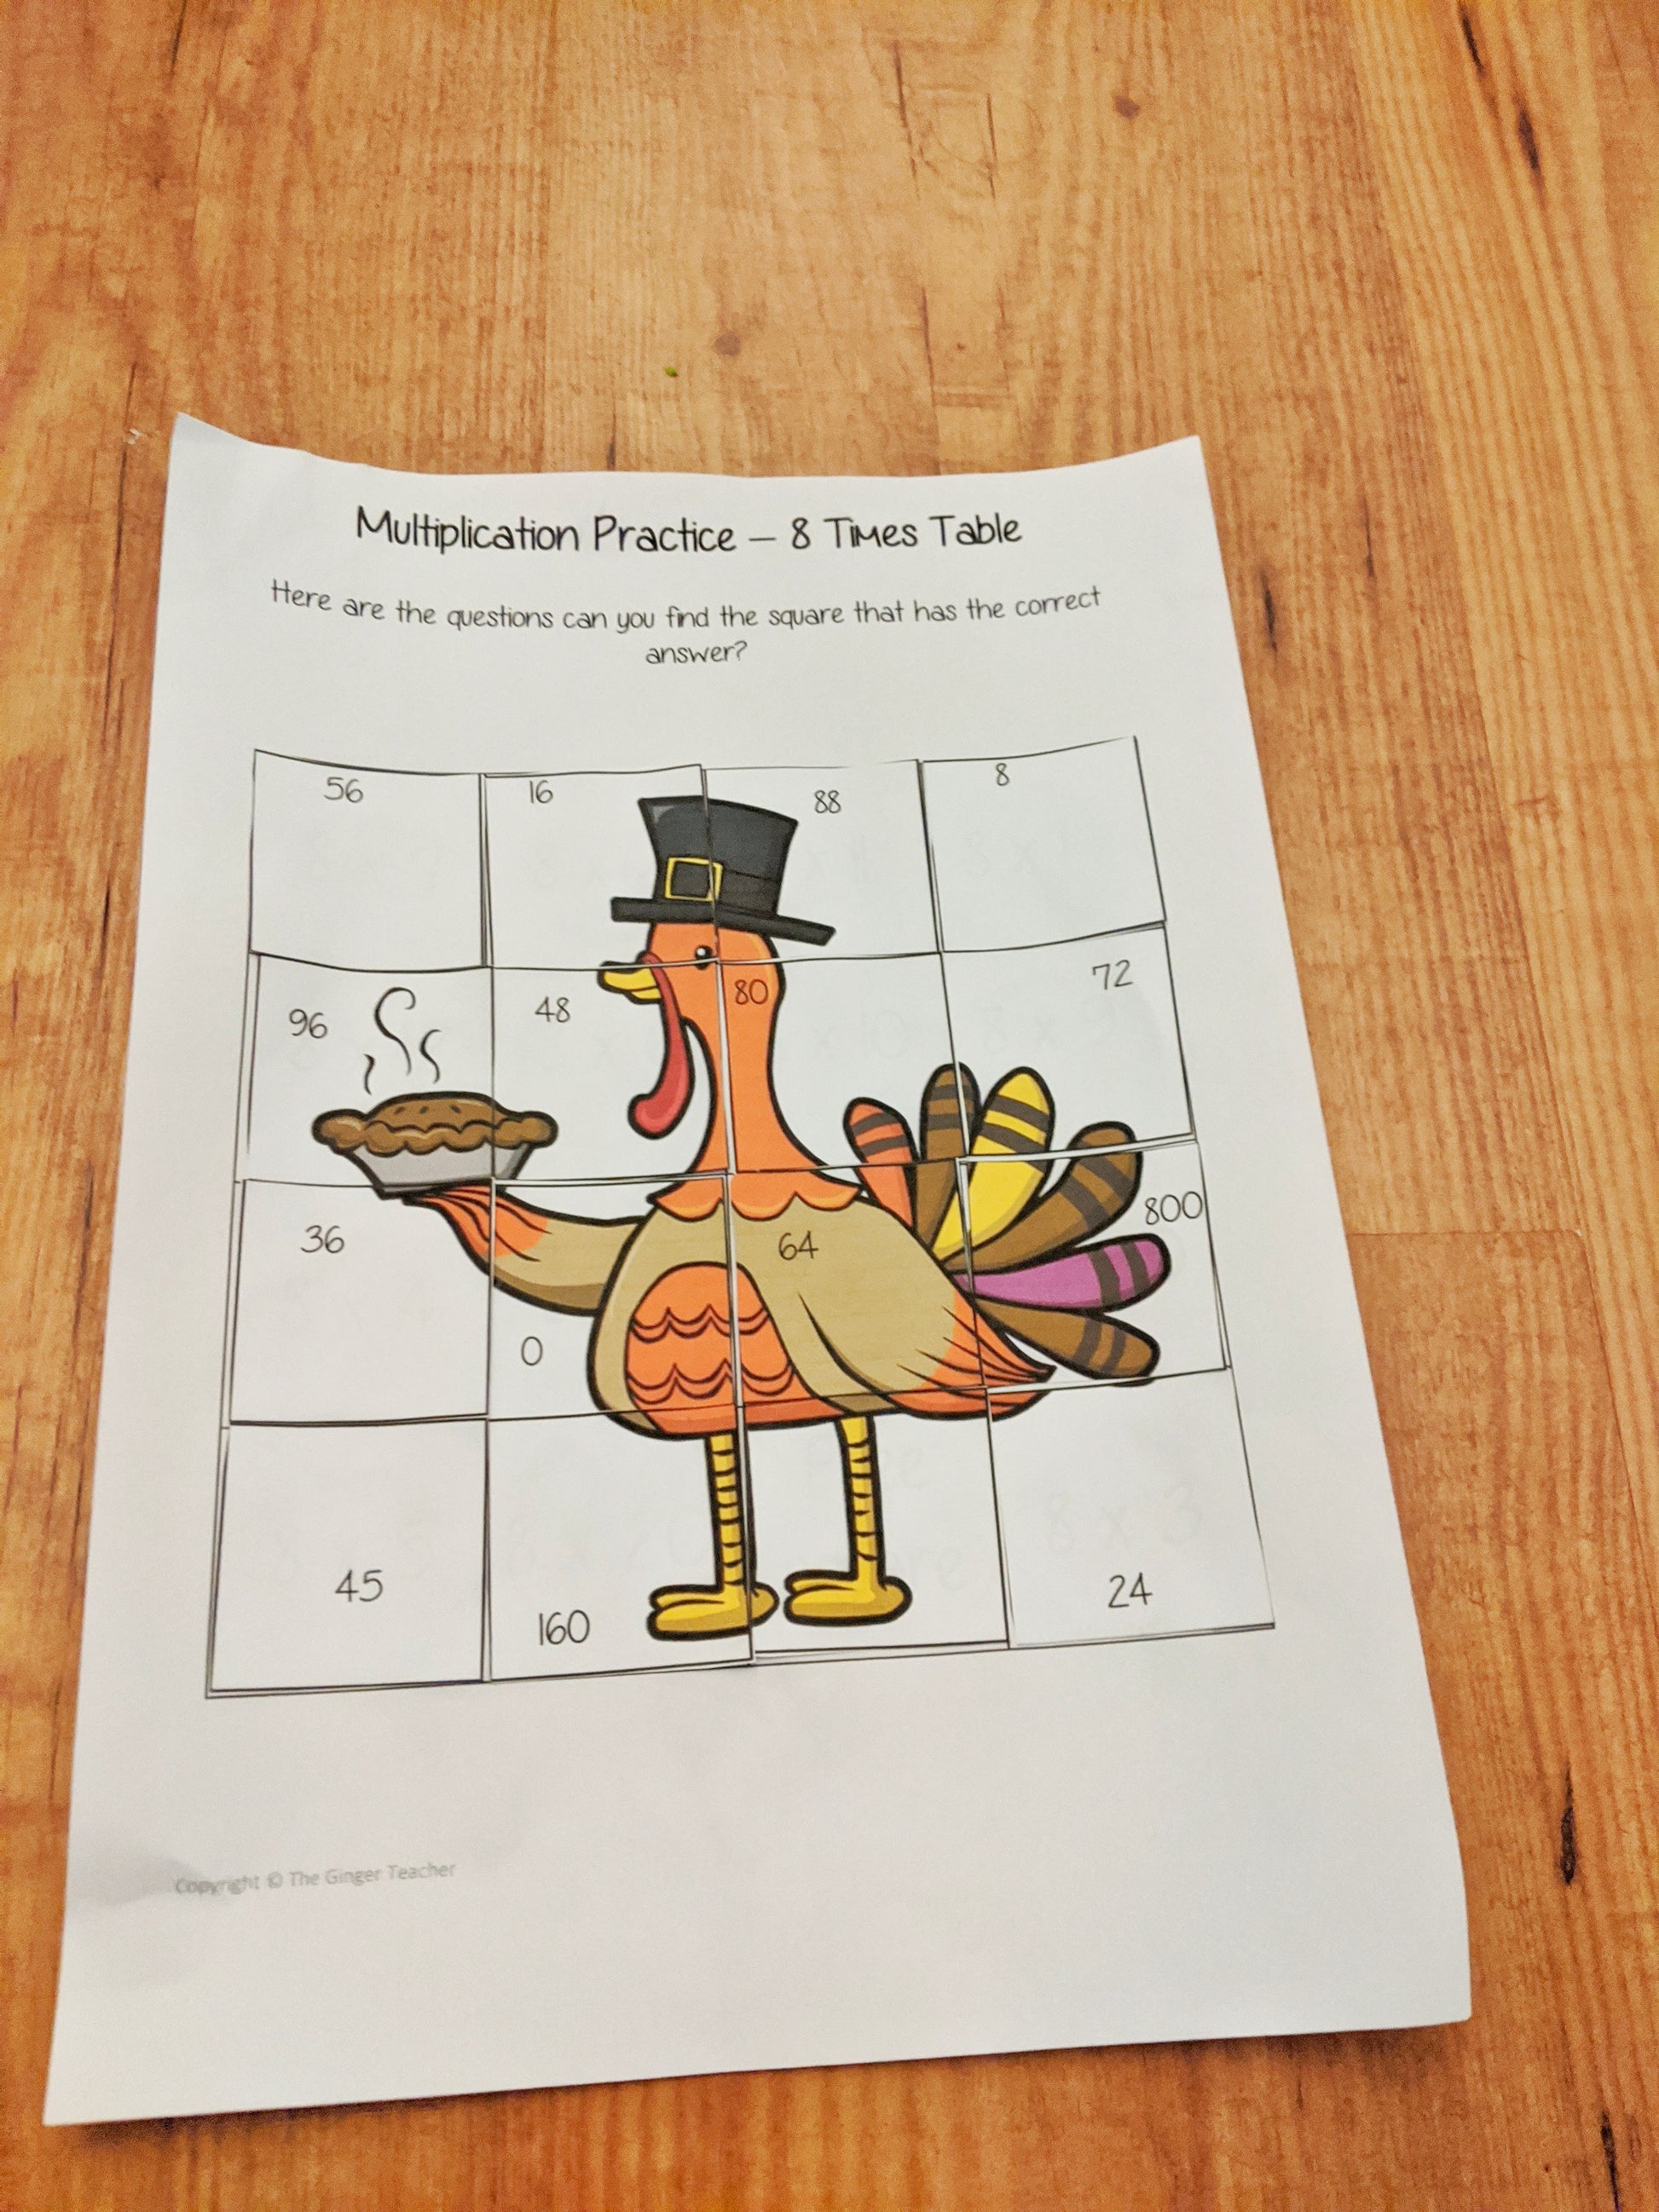 Fall Themed Independent Multiplication Revision Sheets 8x No Prep independent revision activity for the eight times tables. Children have to cut out and stick the correct answer to the question square, when the correct squares are all in place a fall themed picture will be revealed. #teachmultiplication #revisemultiplication #timestables #noprep #mathsworksheets